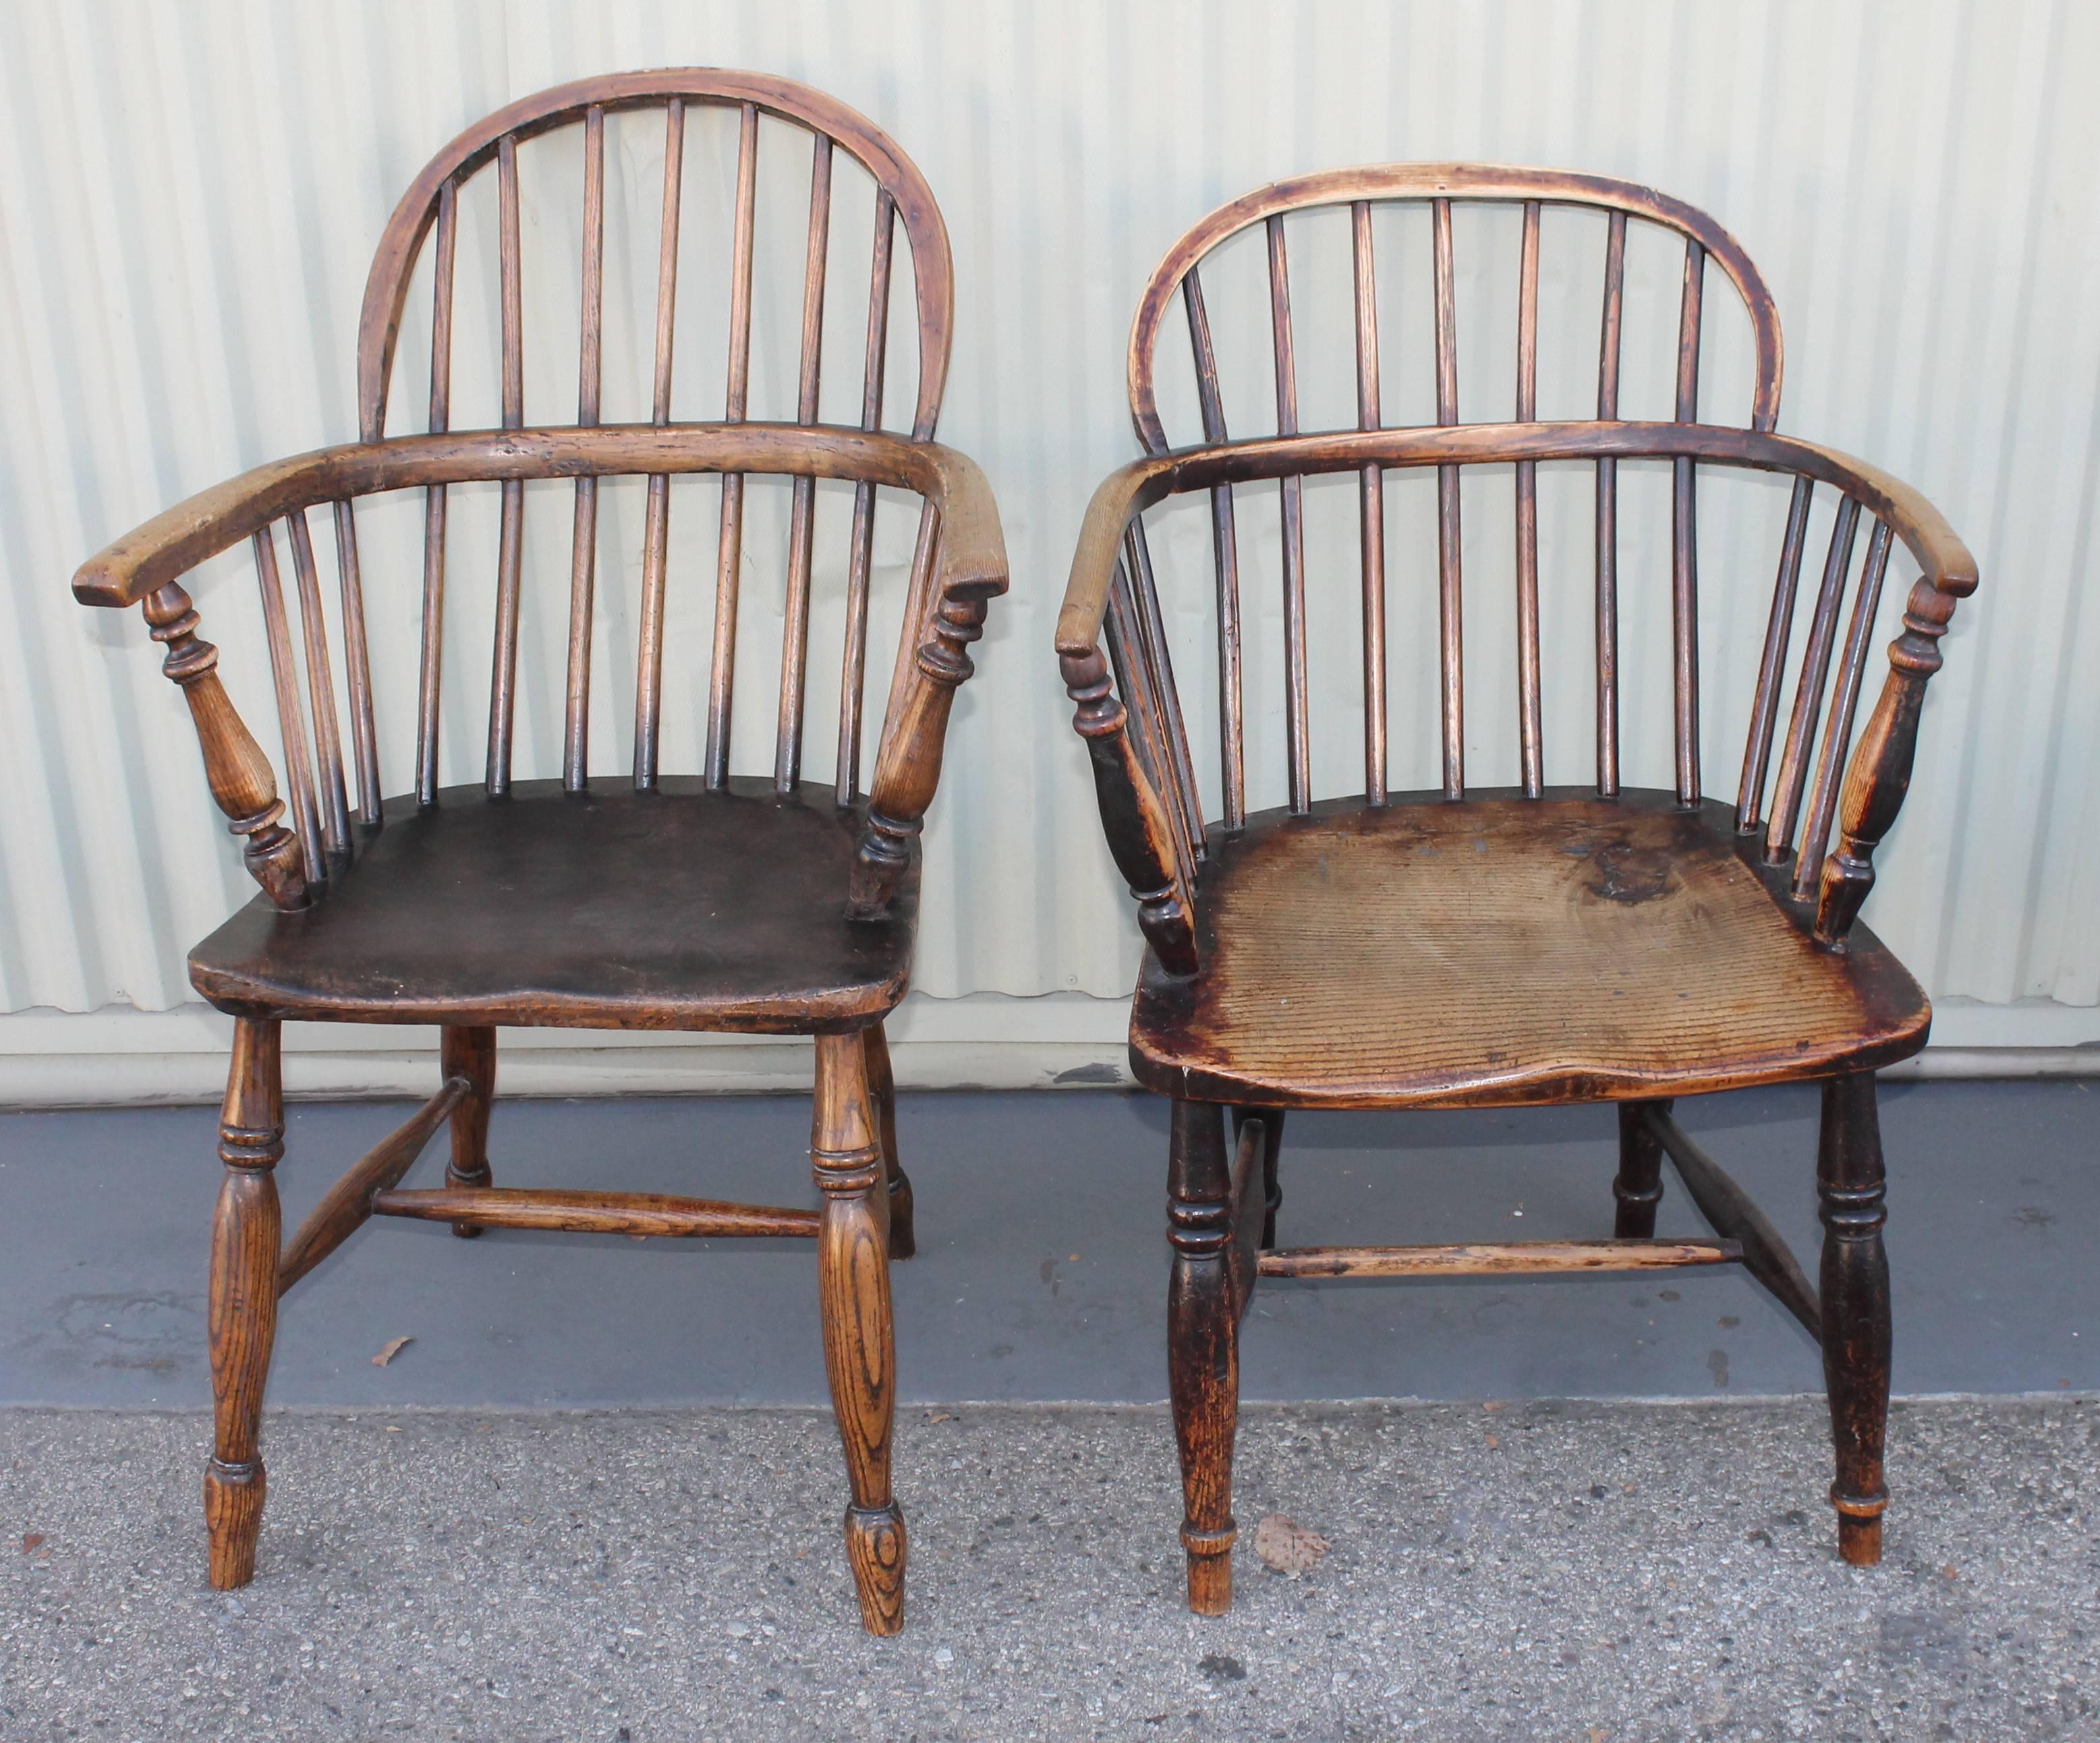 Country Windsor Chairs, Early 19th Century English Assembled Collection / 4